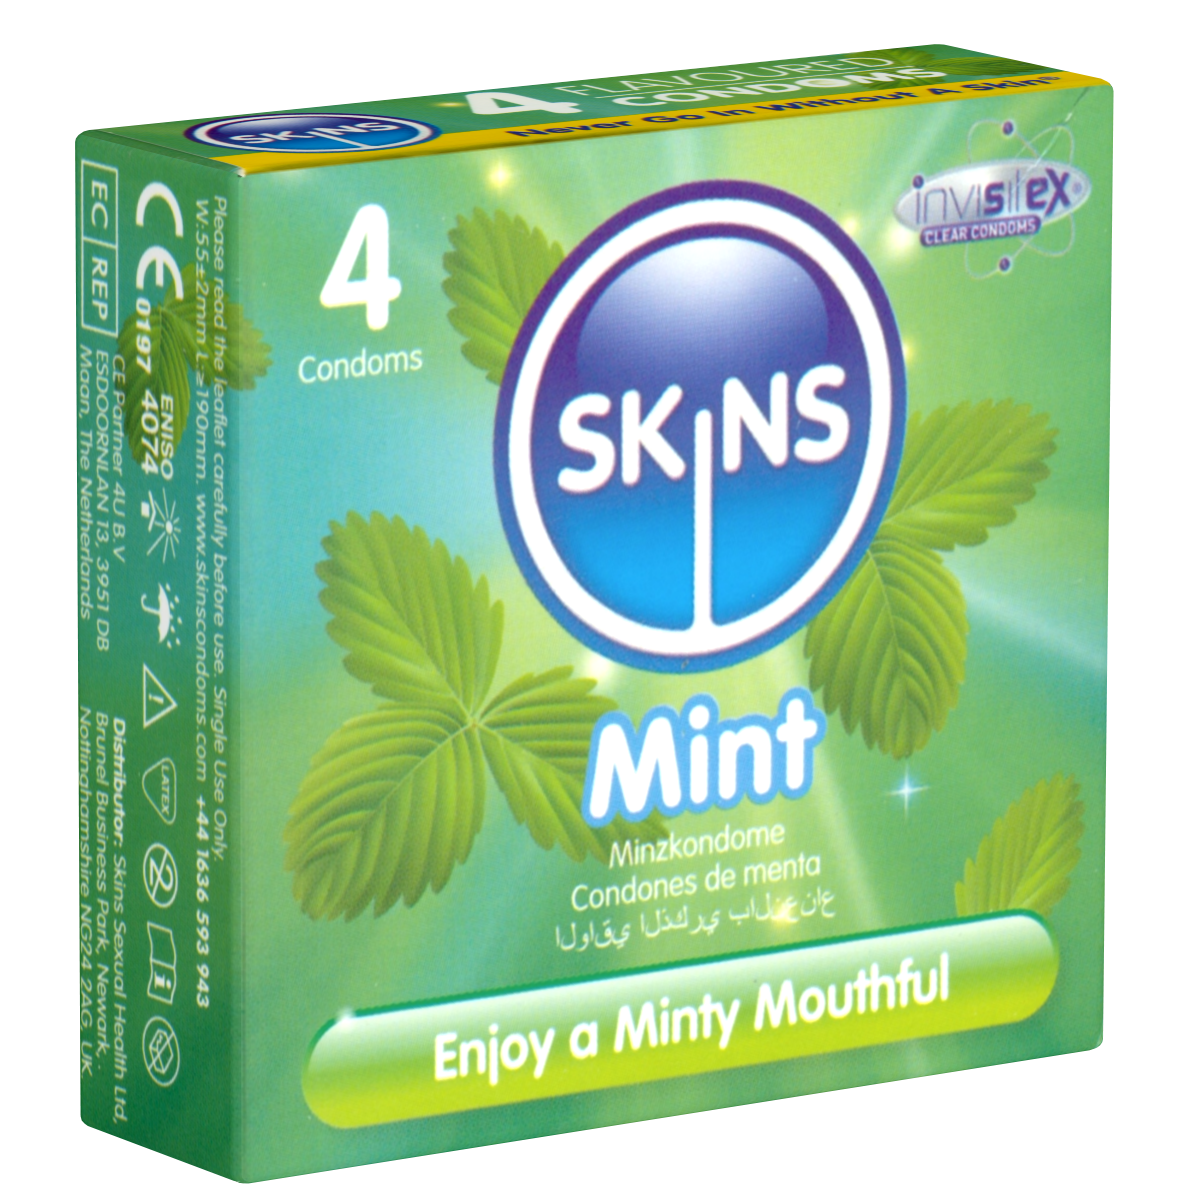 Skins «Mint» 4 condoms with refreshing mint flavour - without latex smell